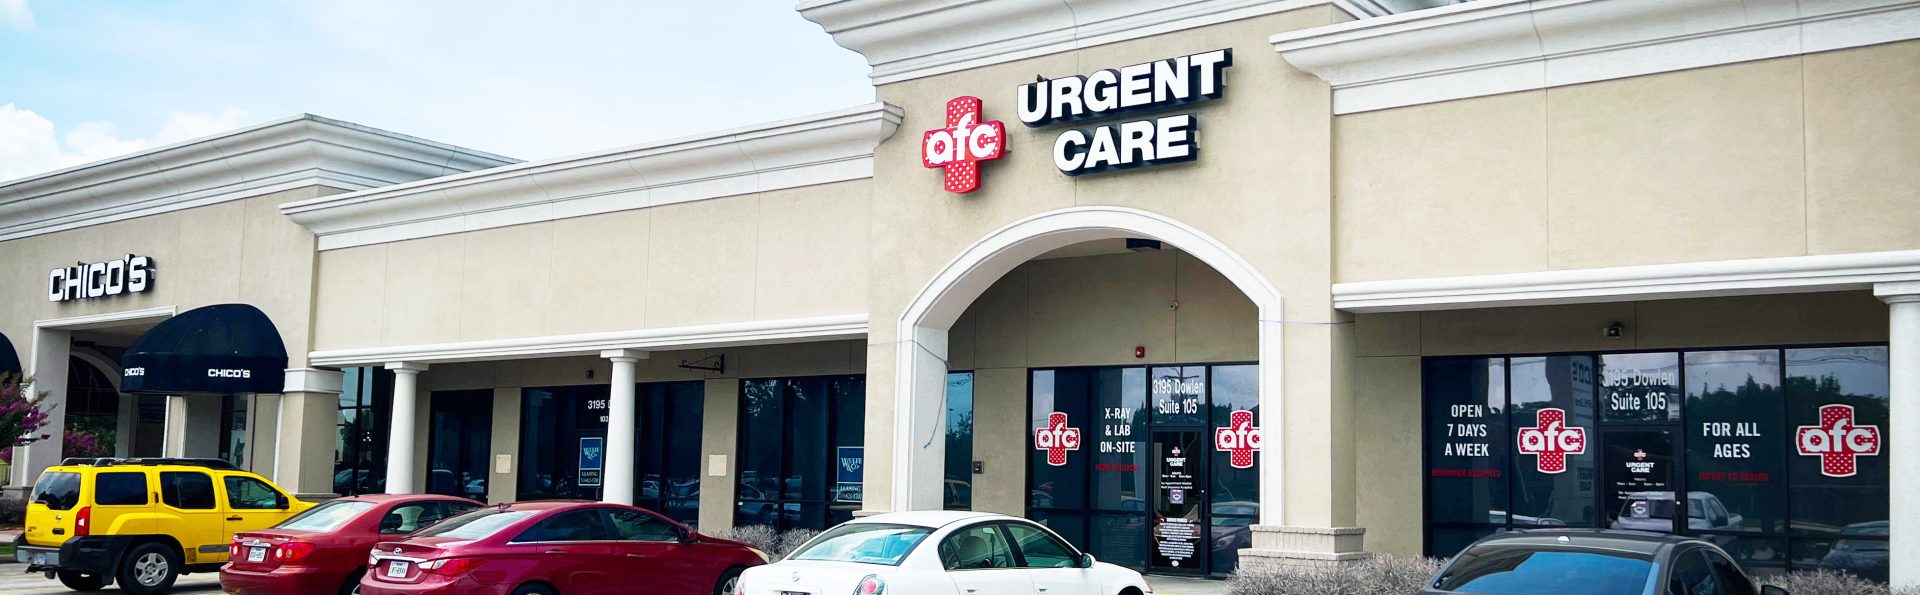 Visit our urgent care center in Beaumont, TX